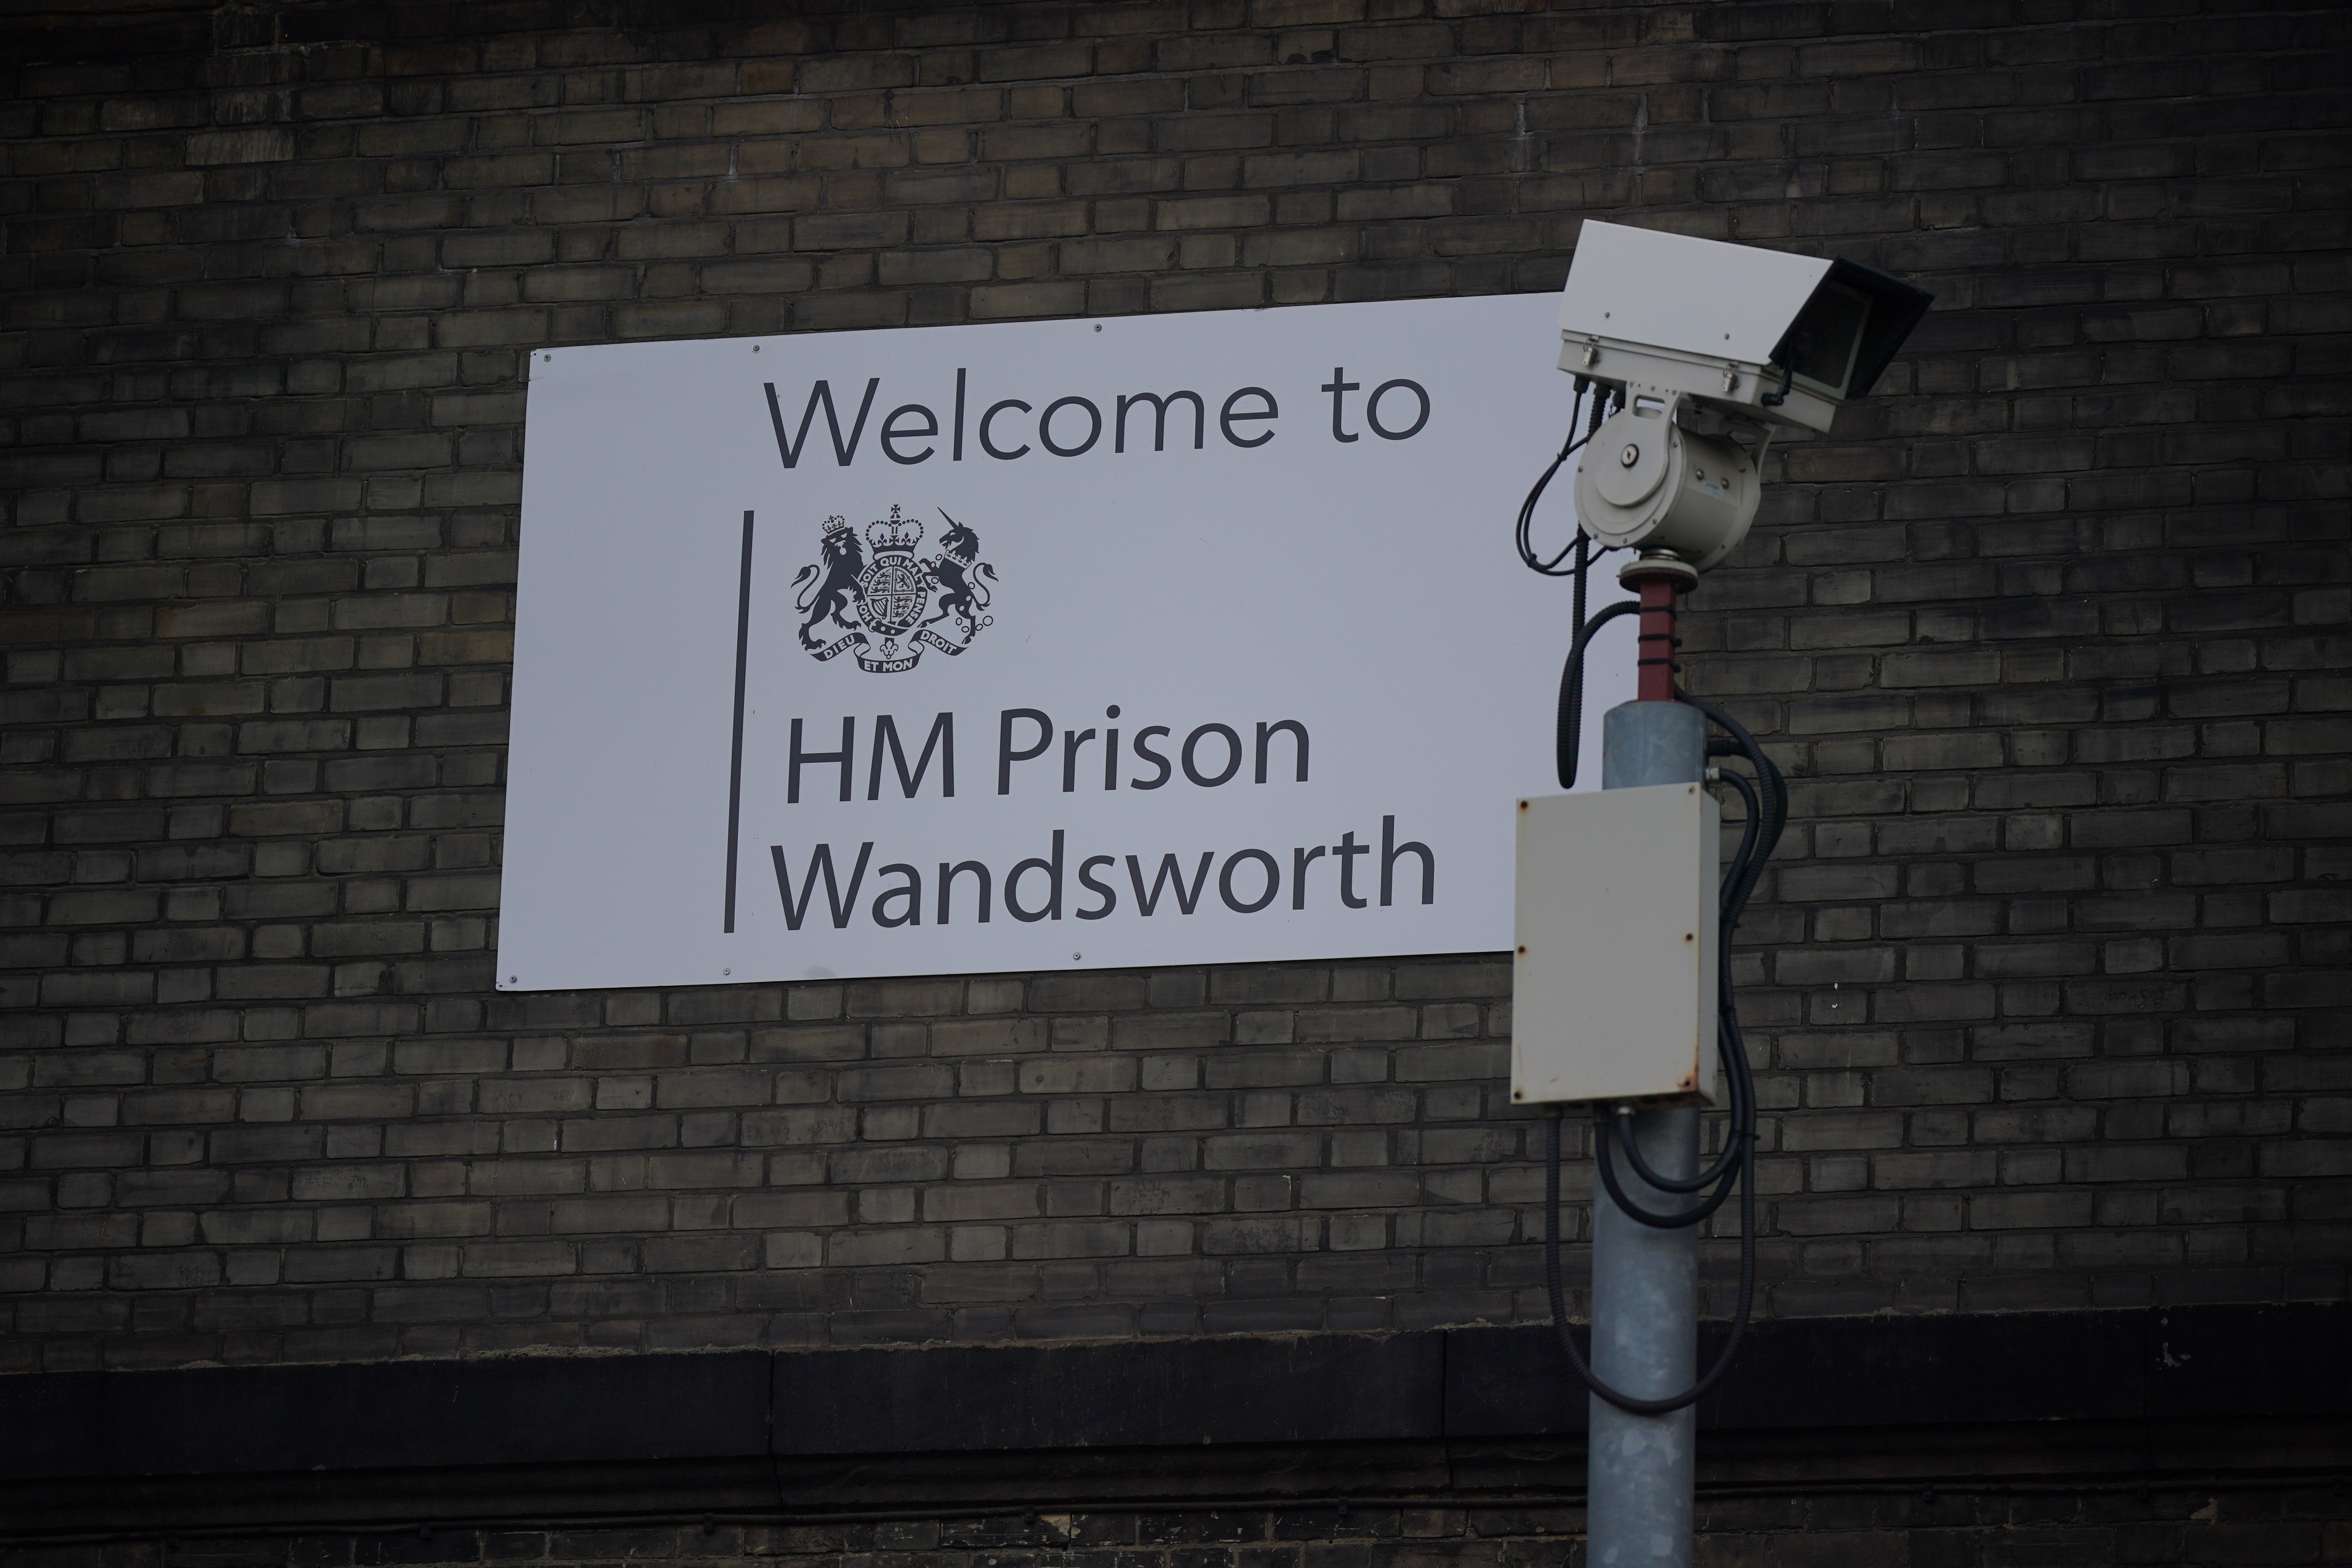 Questions have been raised as to why the terror suspect was being held at HMP Wandsworth